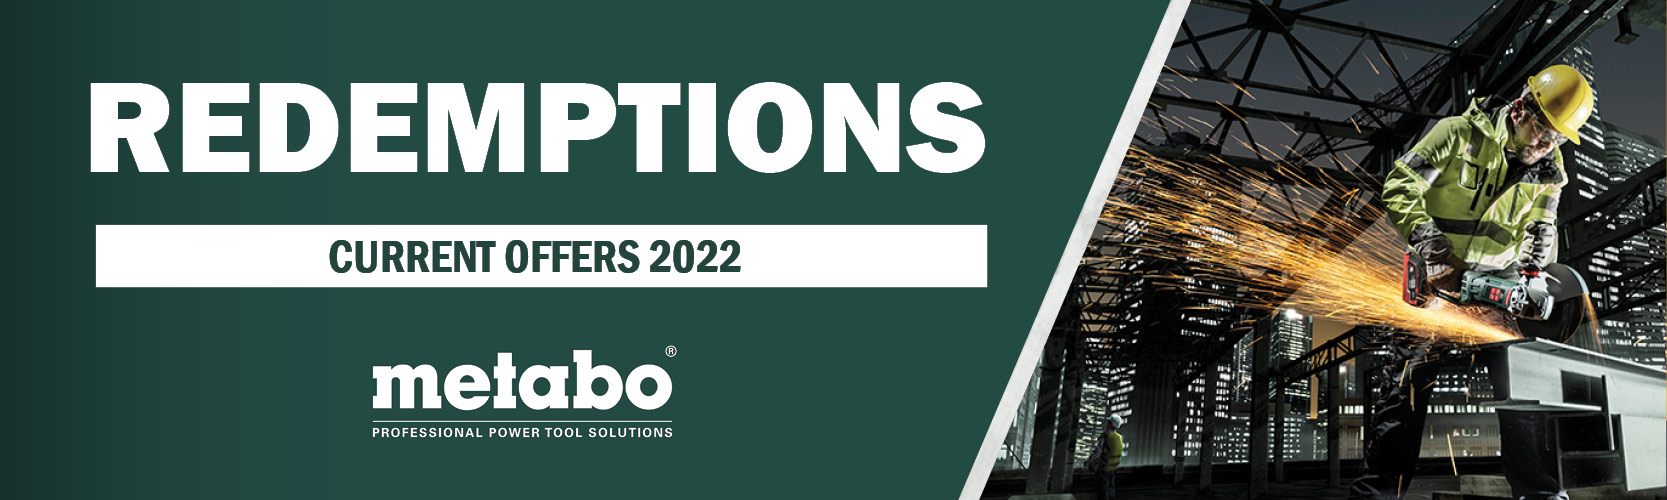 Metabo Redemptions